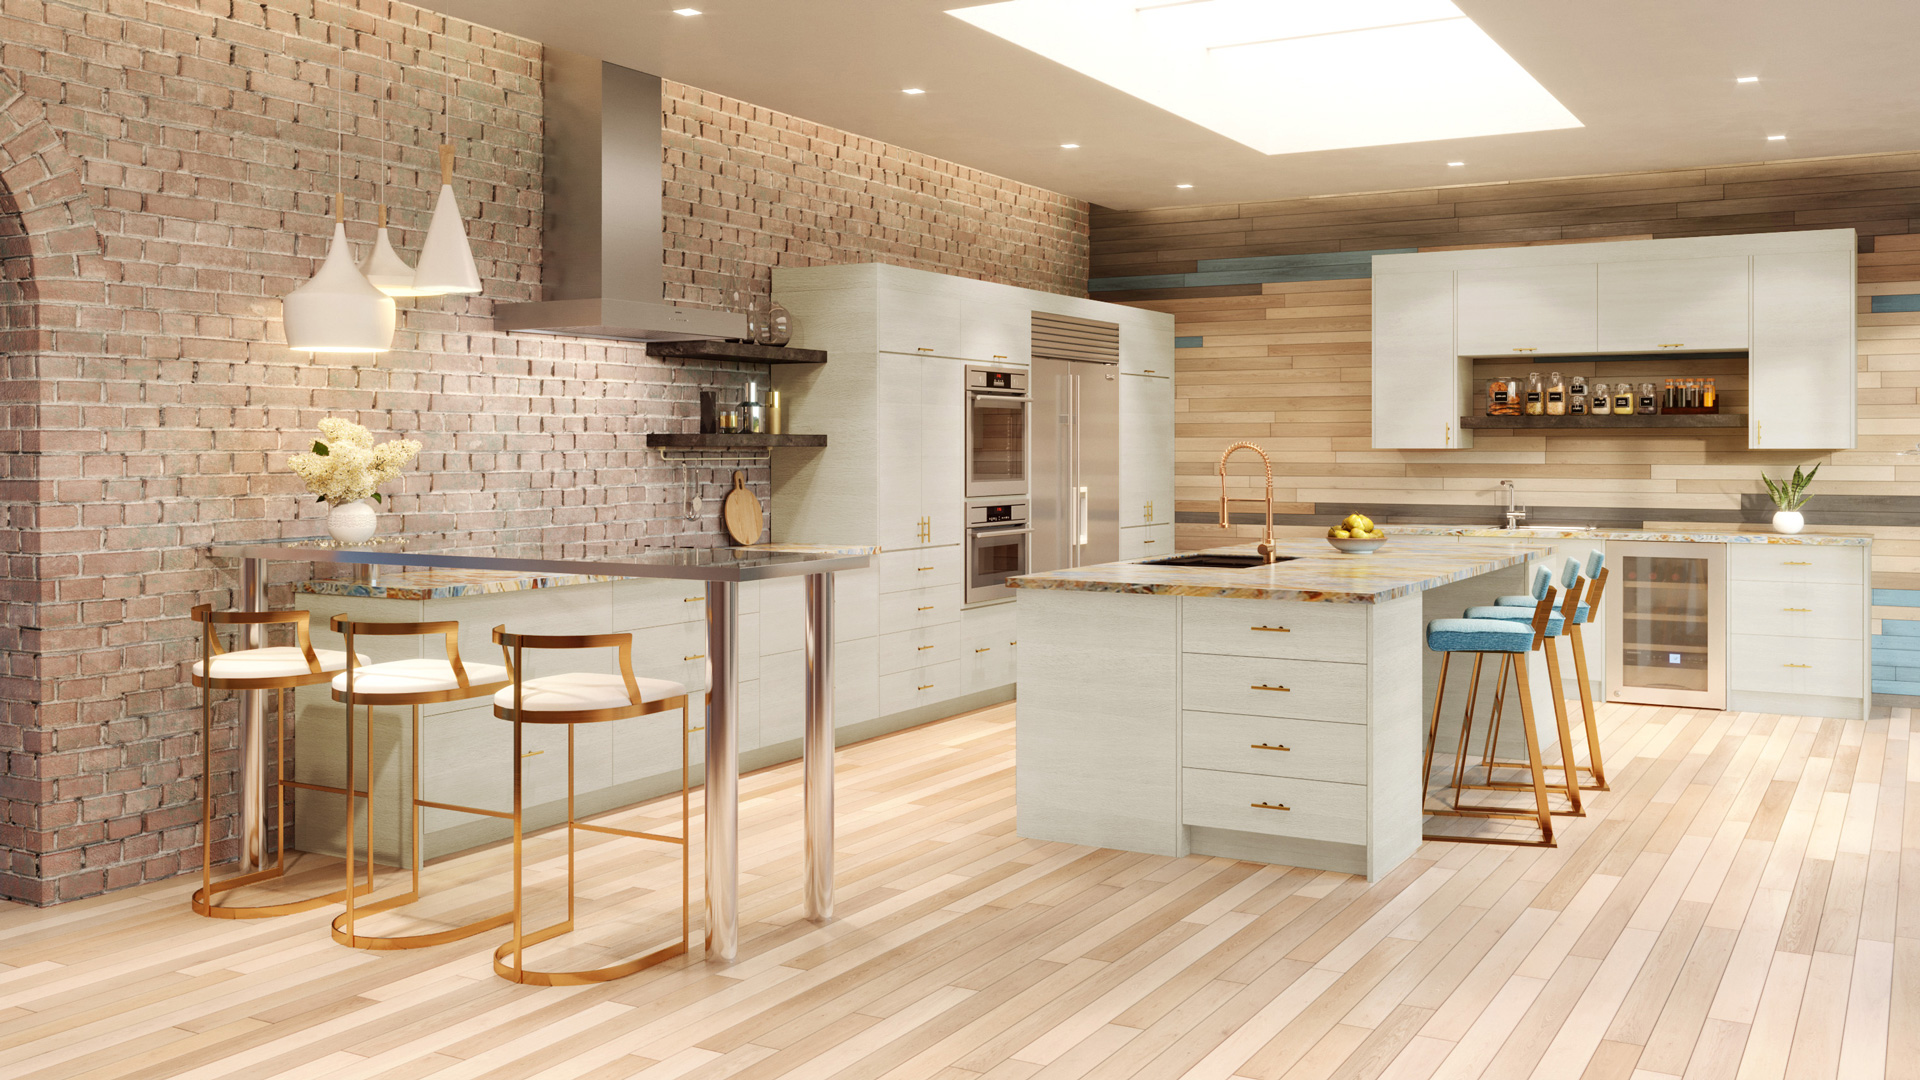 Doing Kitchen Remodeling Which Are The 5 Best Flooring Options Simply Kitchens